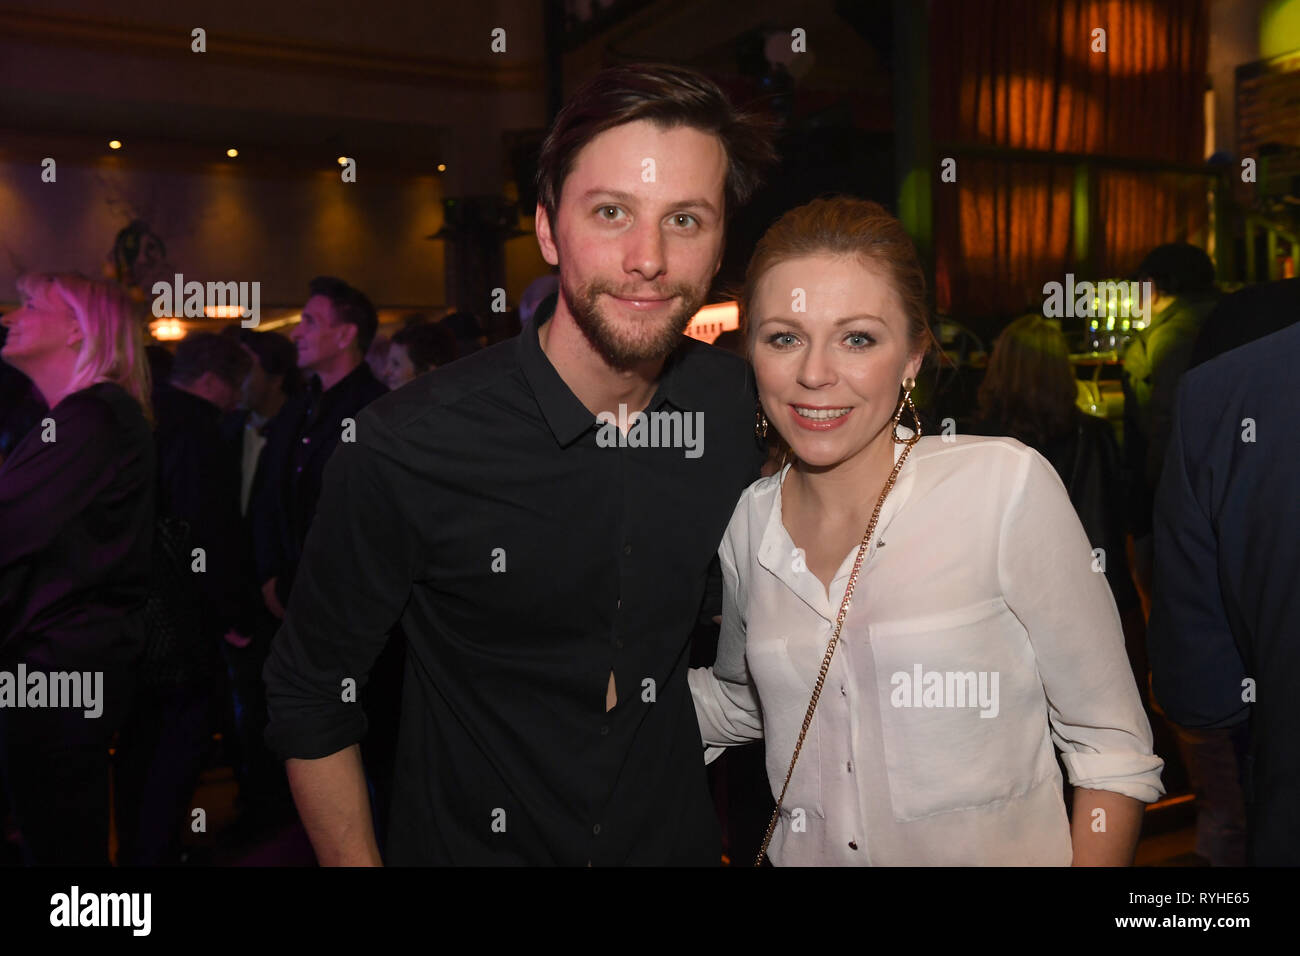 13 March 2019, Bavaria, München: The actor Jonathan Beck and the actress Anna Ewelina celebrate at the After Work Party of the production company ndf in the Parkcafe. Photo: Felix Hörhager/dpa Stock Photo